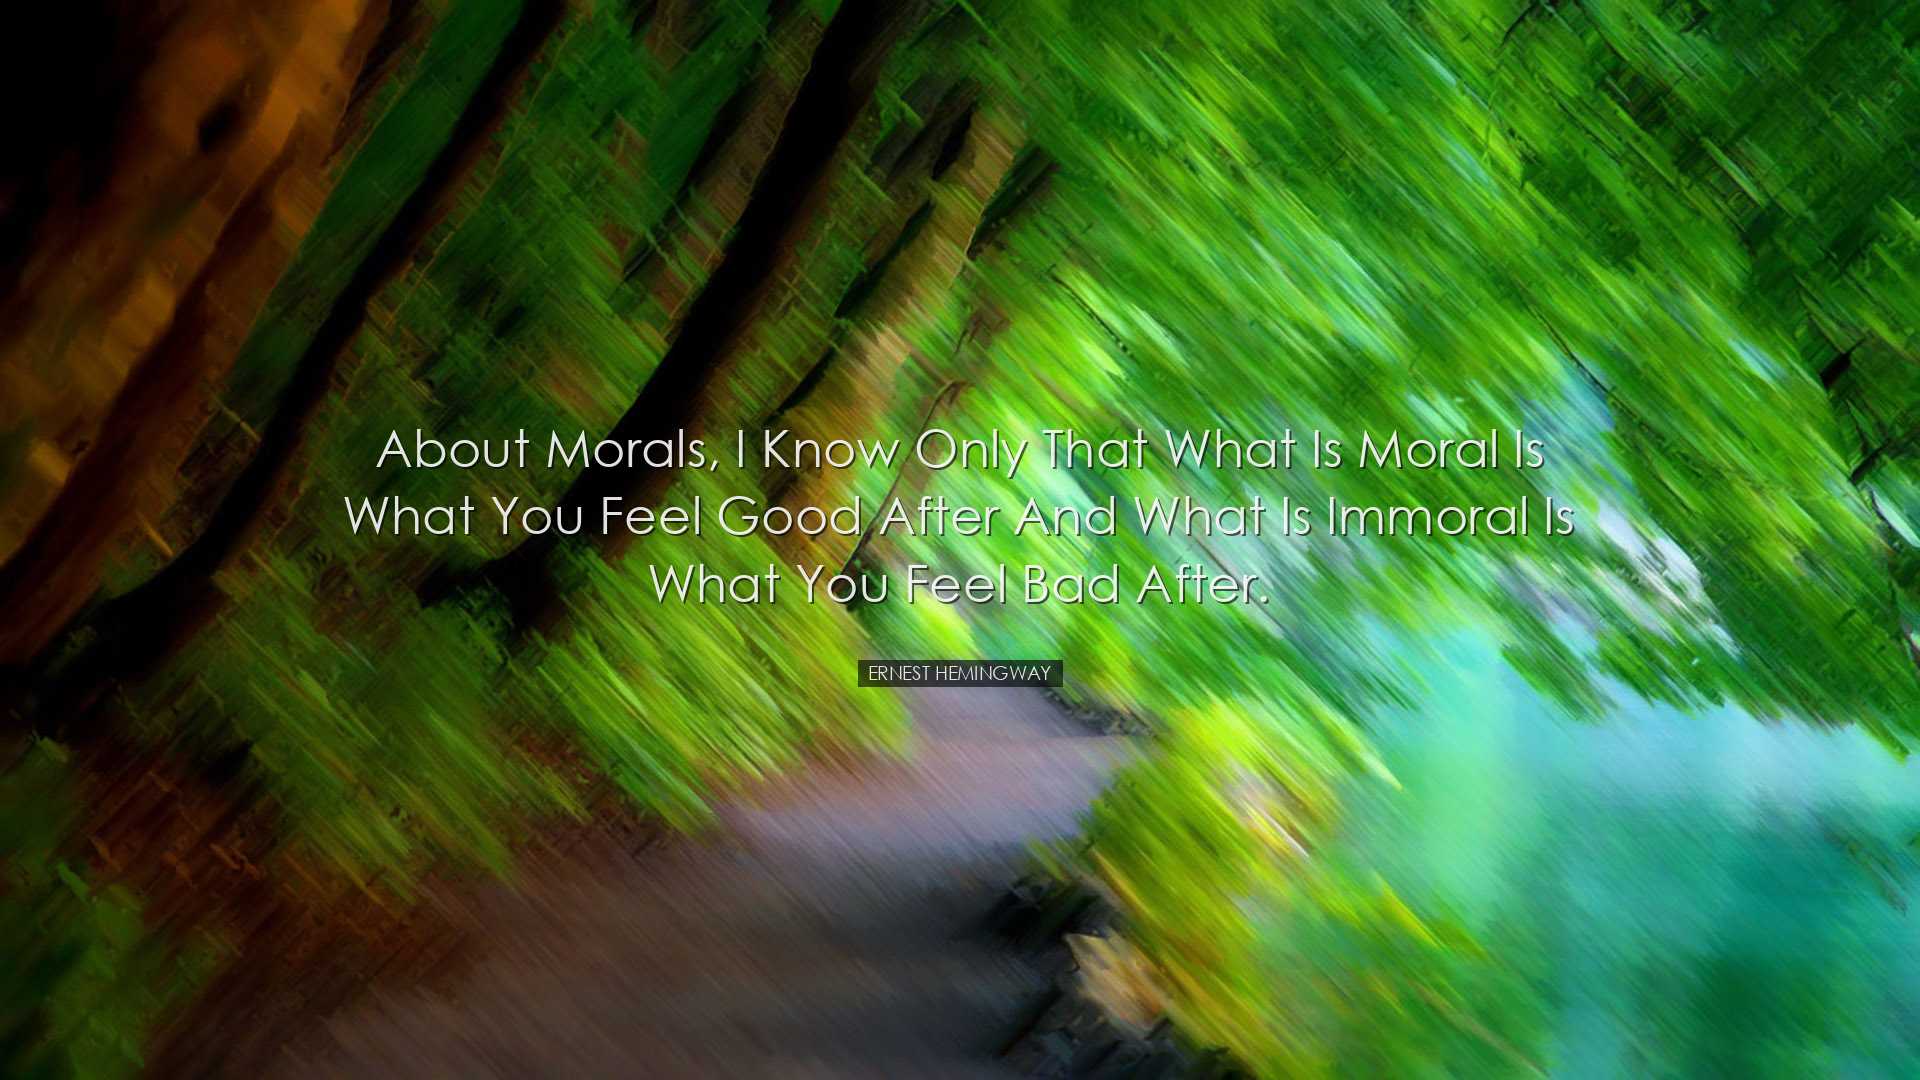 About morals, I know only that what is moral is what you feel good